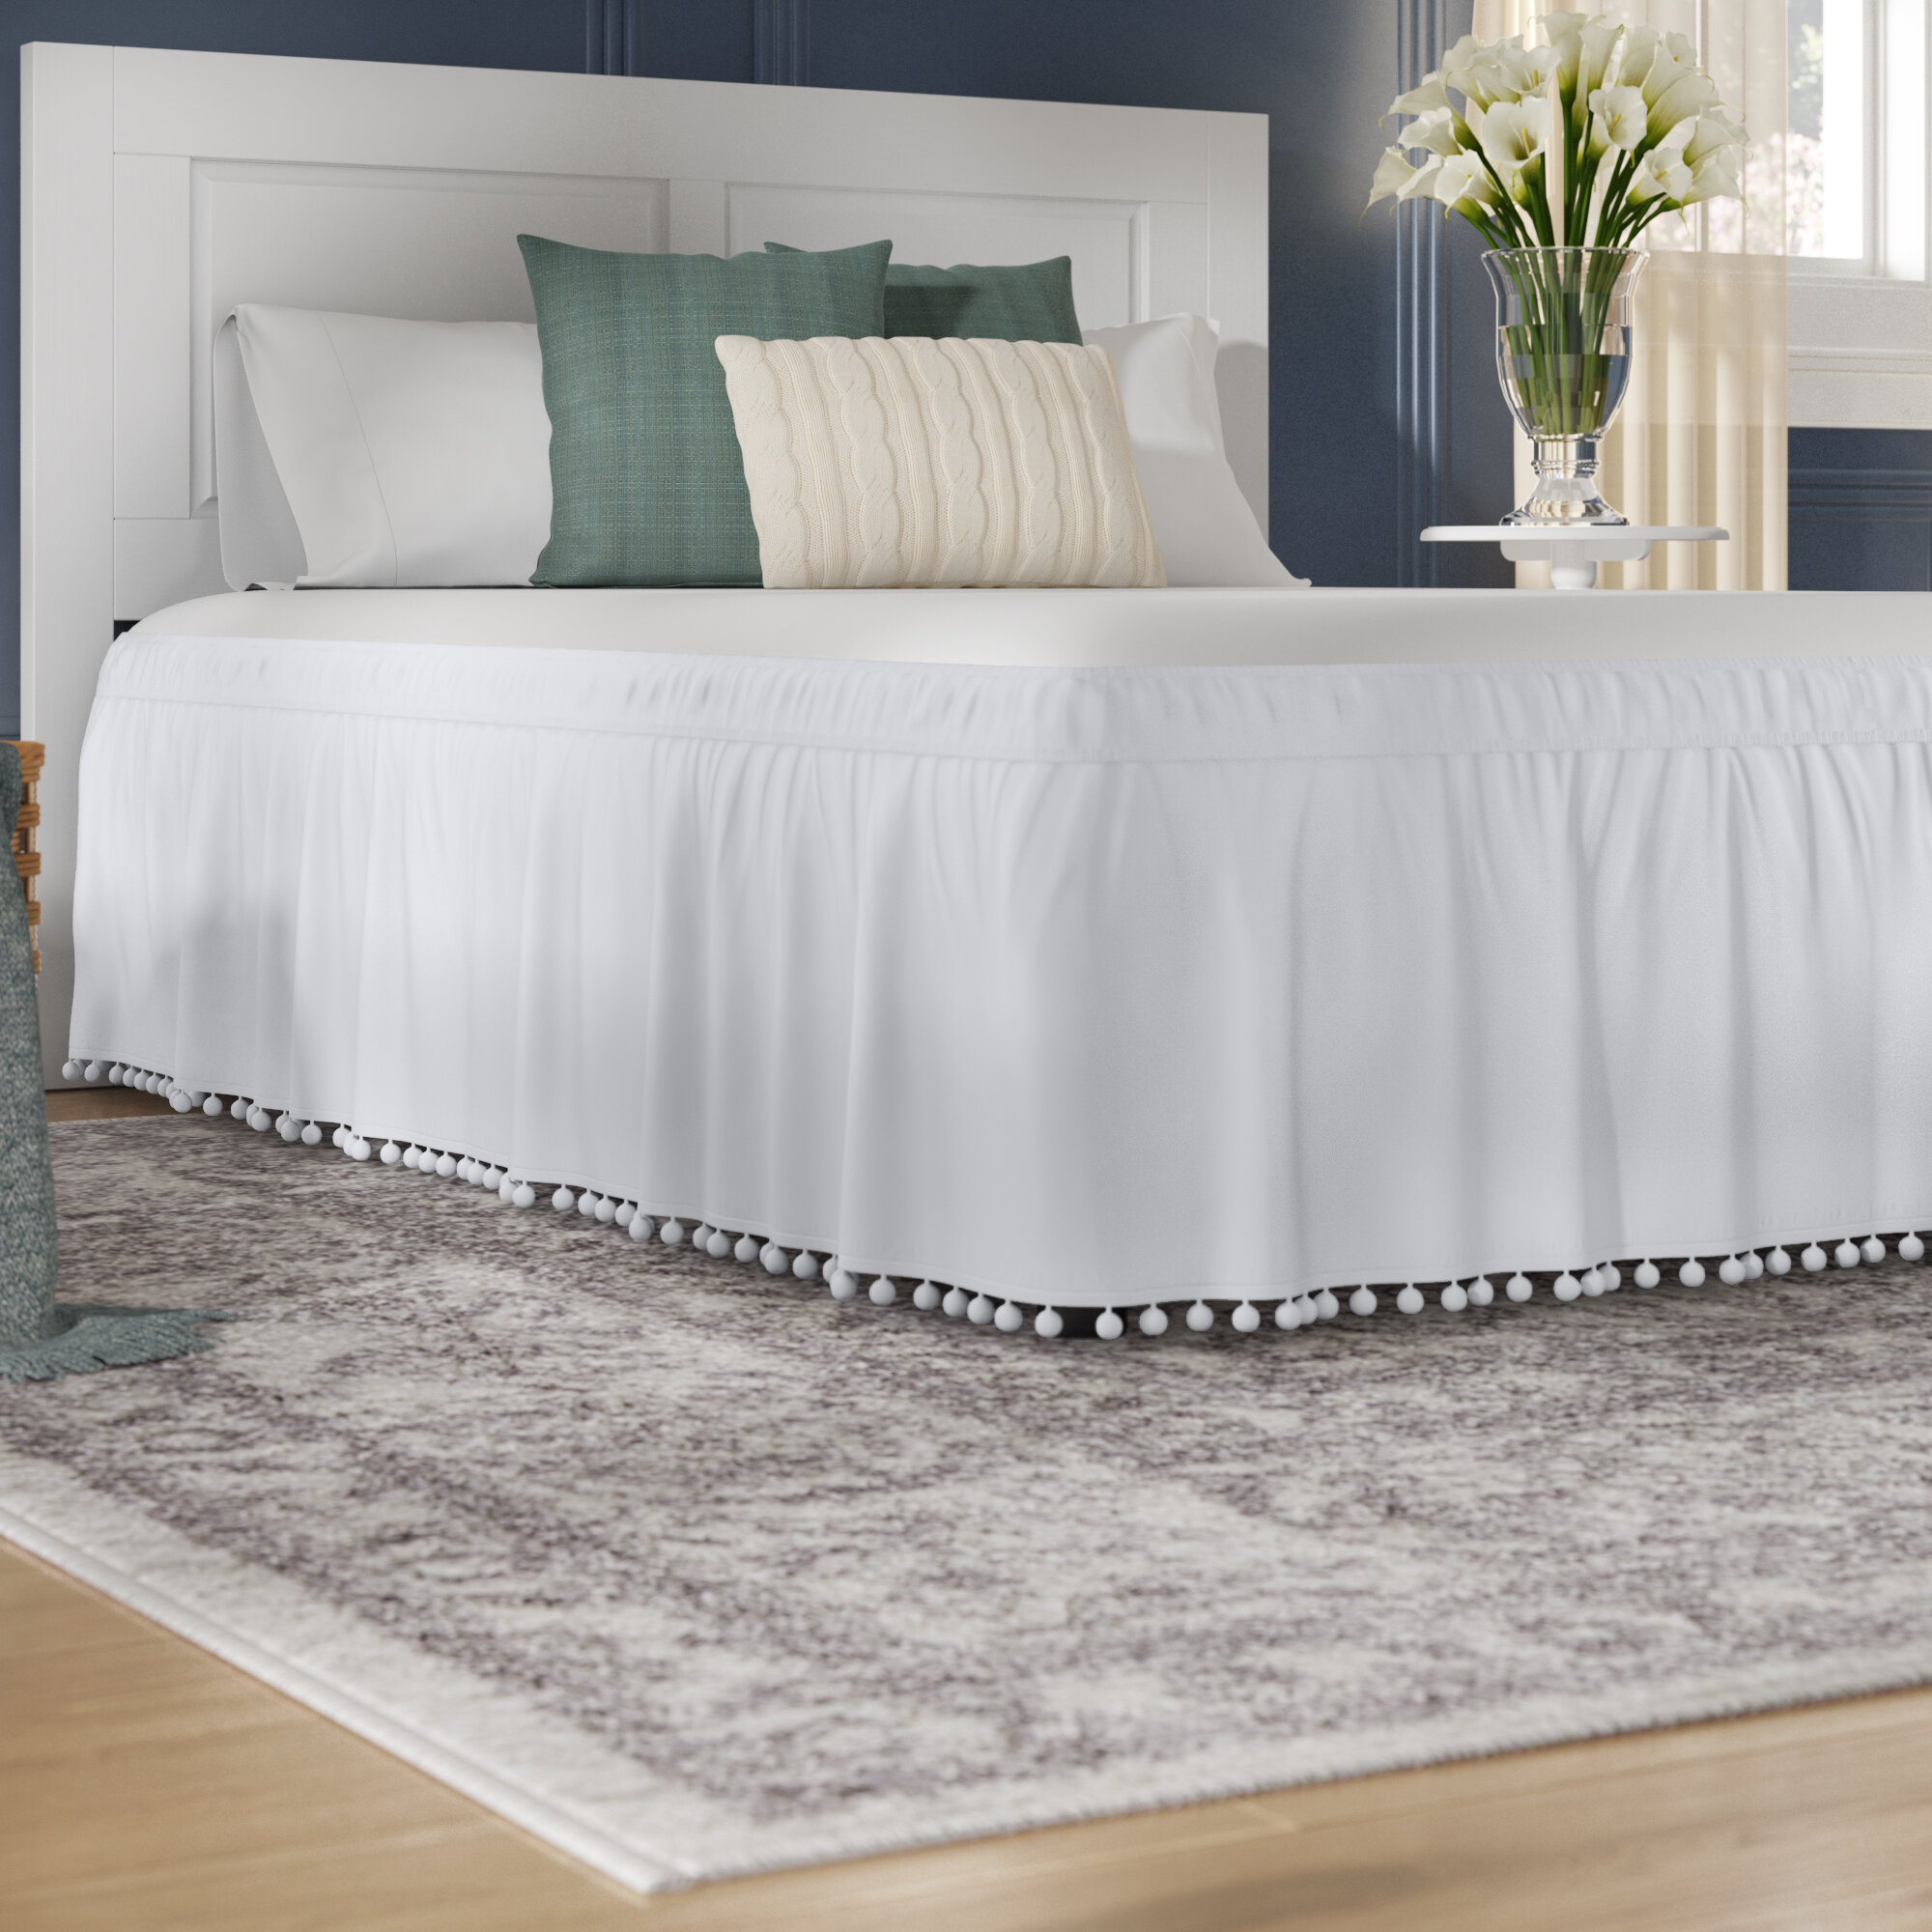 king bed skirt 16 inch drop